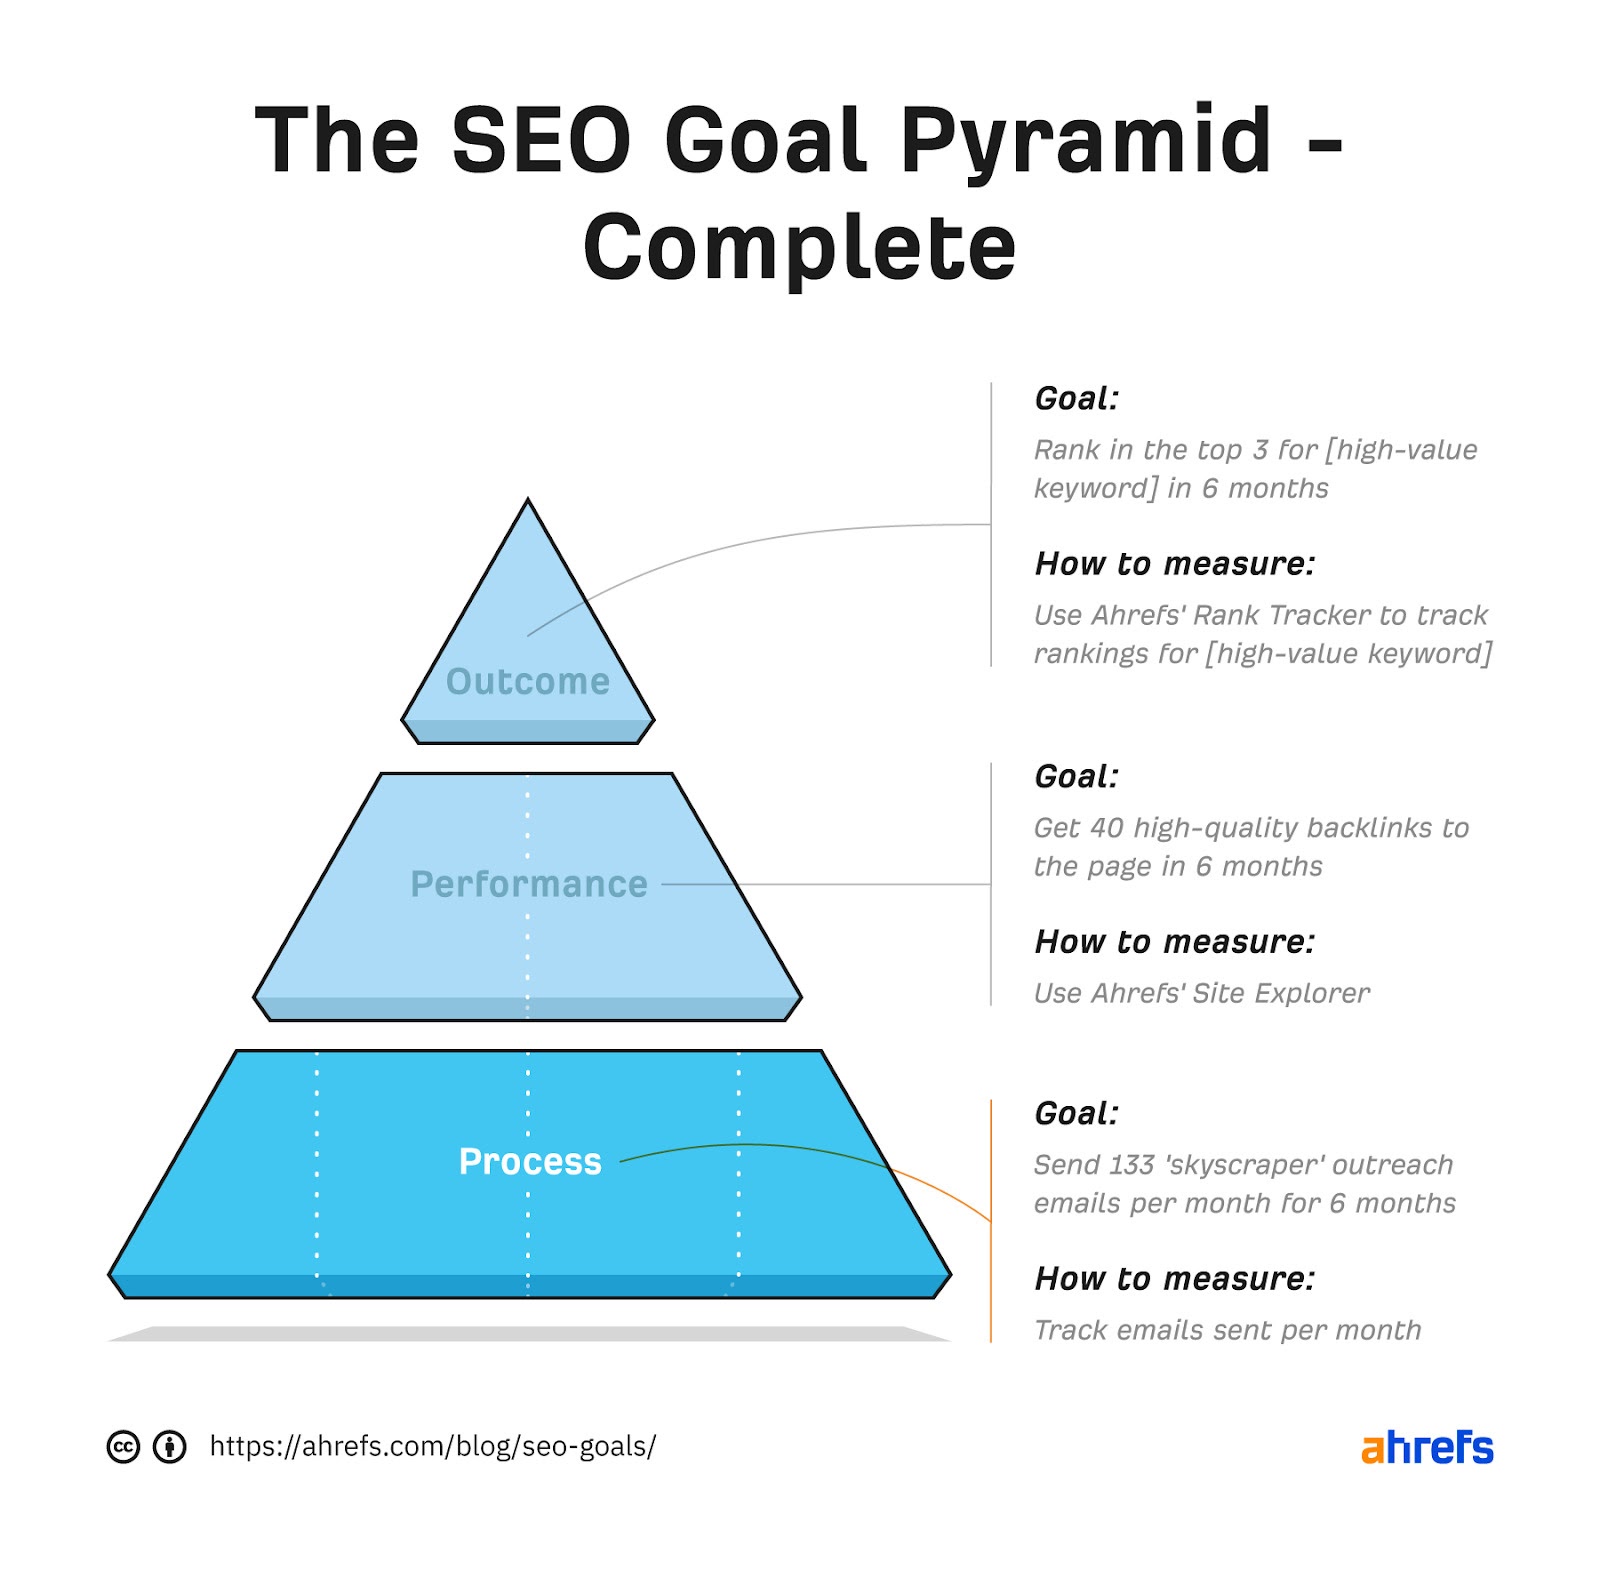 Pyramid split into 3 sections. seo for startups Outcome at the top, then performance, then process. 